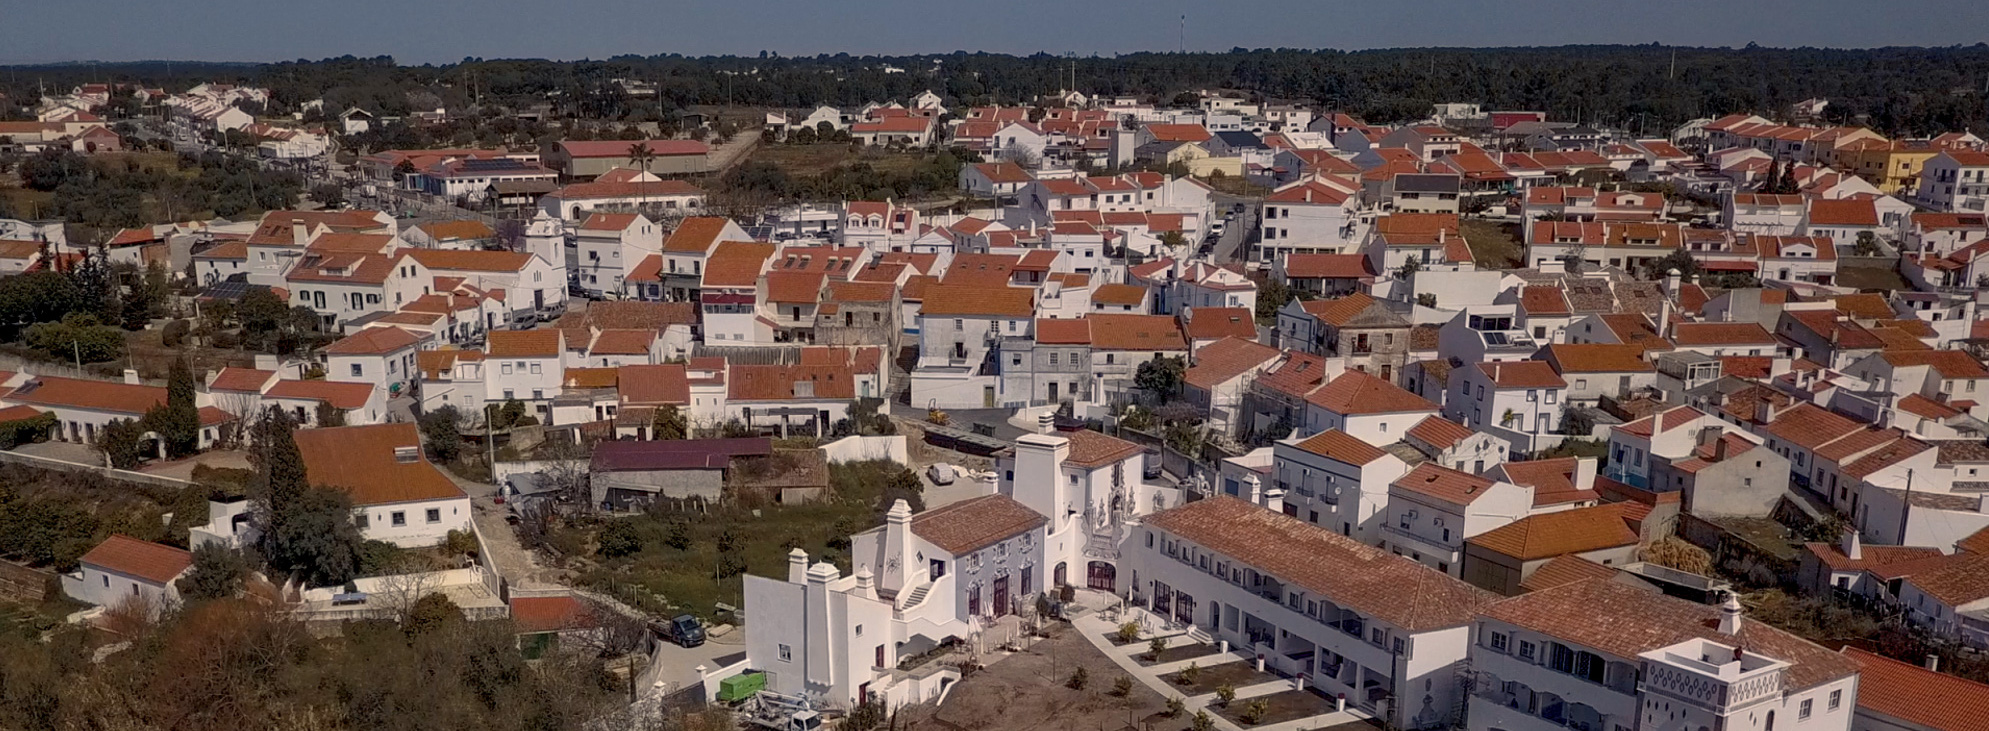 Town of Melides